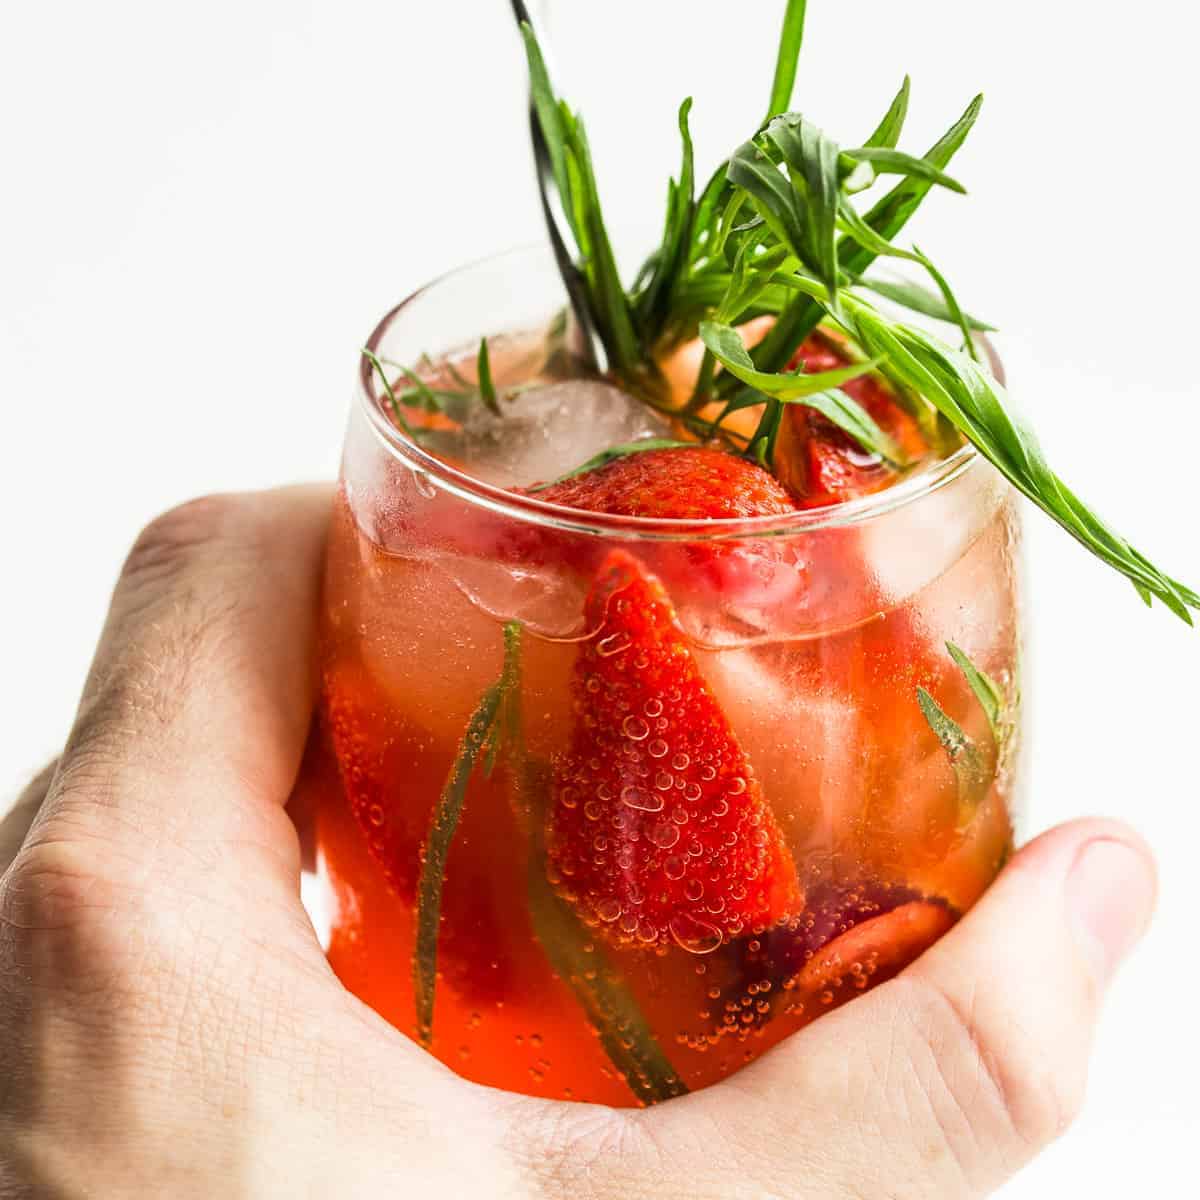 close-up of fermented strawberry soda in glass held by a hand on white background.